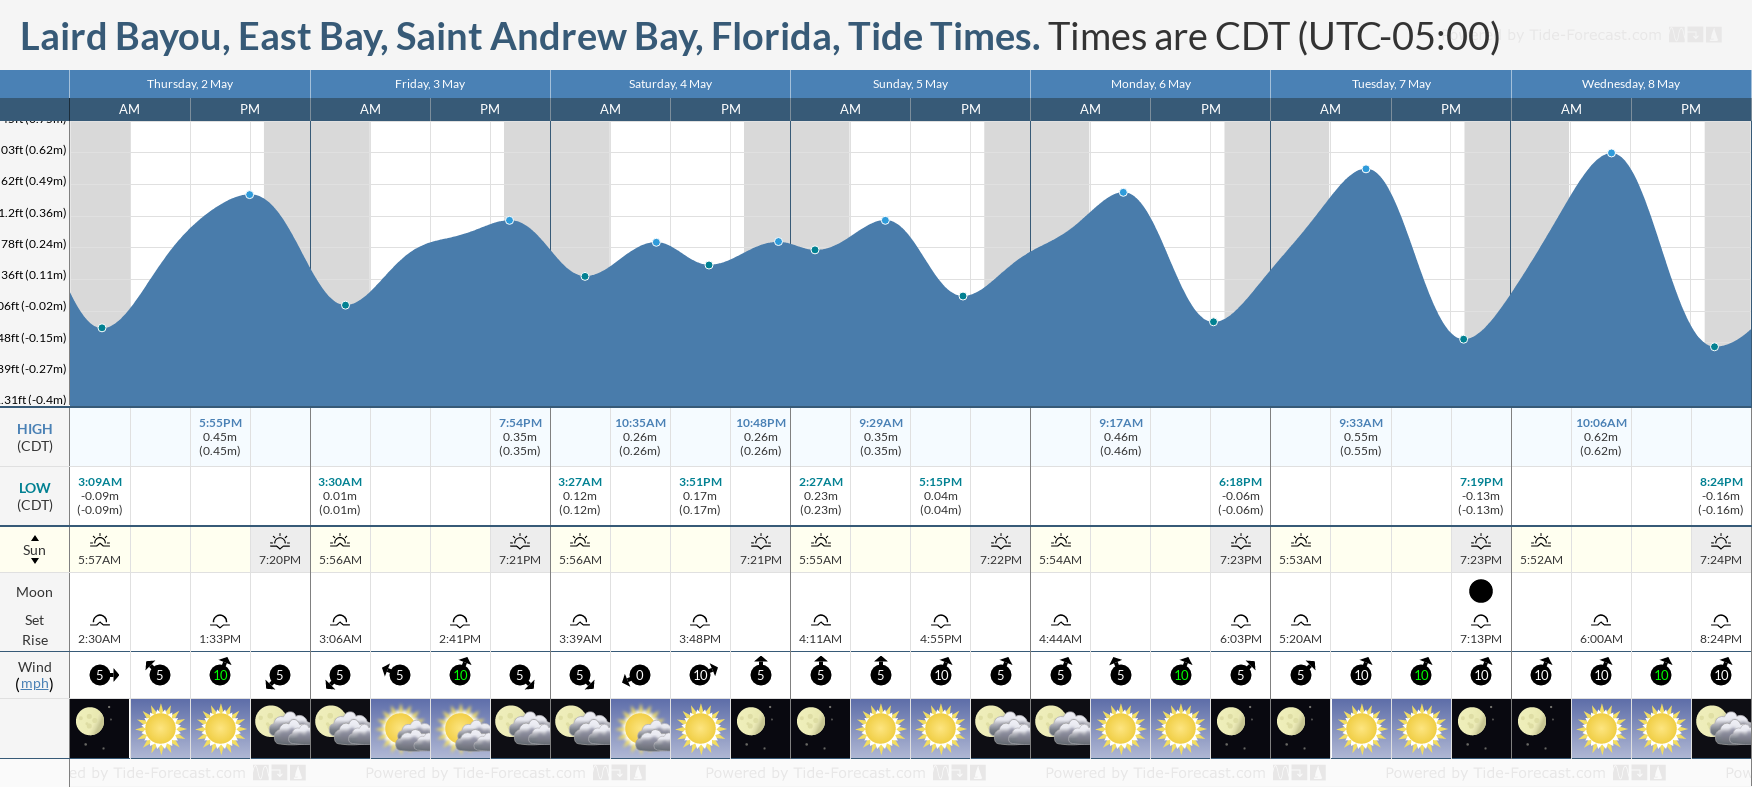 Laird Bayou, East Bay, Saint Andrew Bay, Florida Tide Chart including high and low tide tide times for the next 7 days